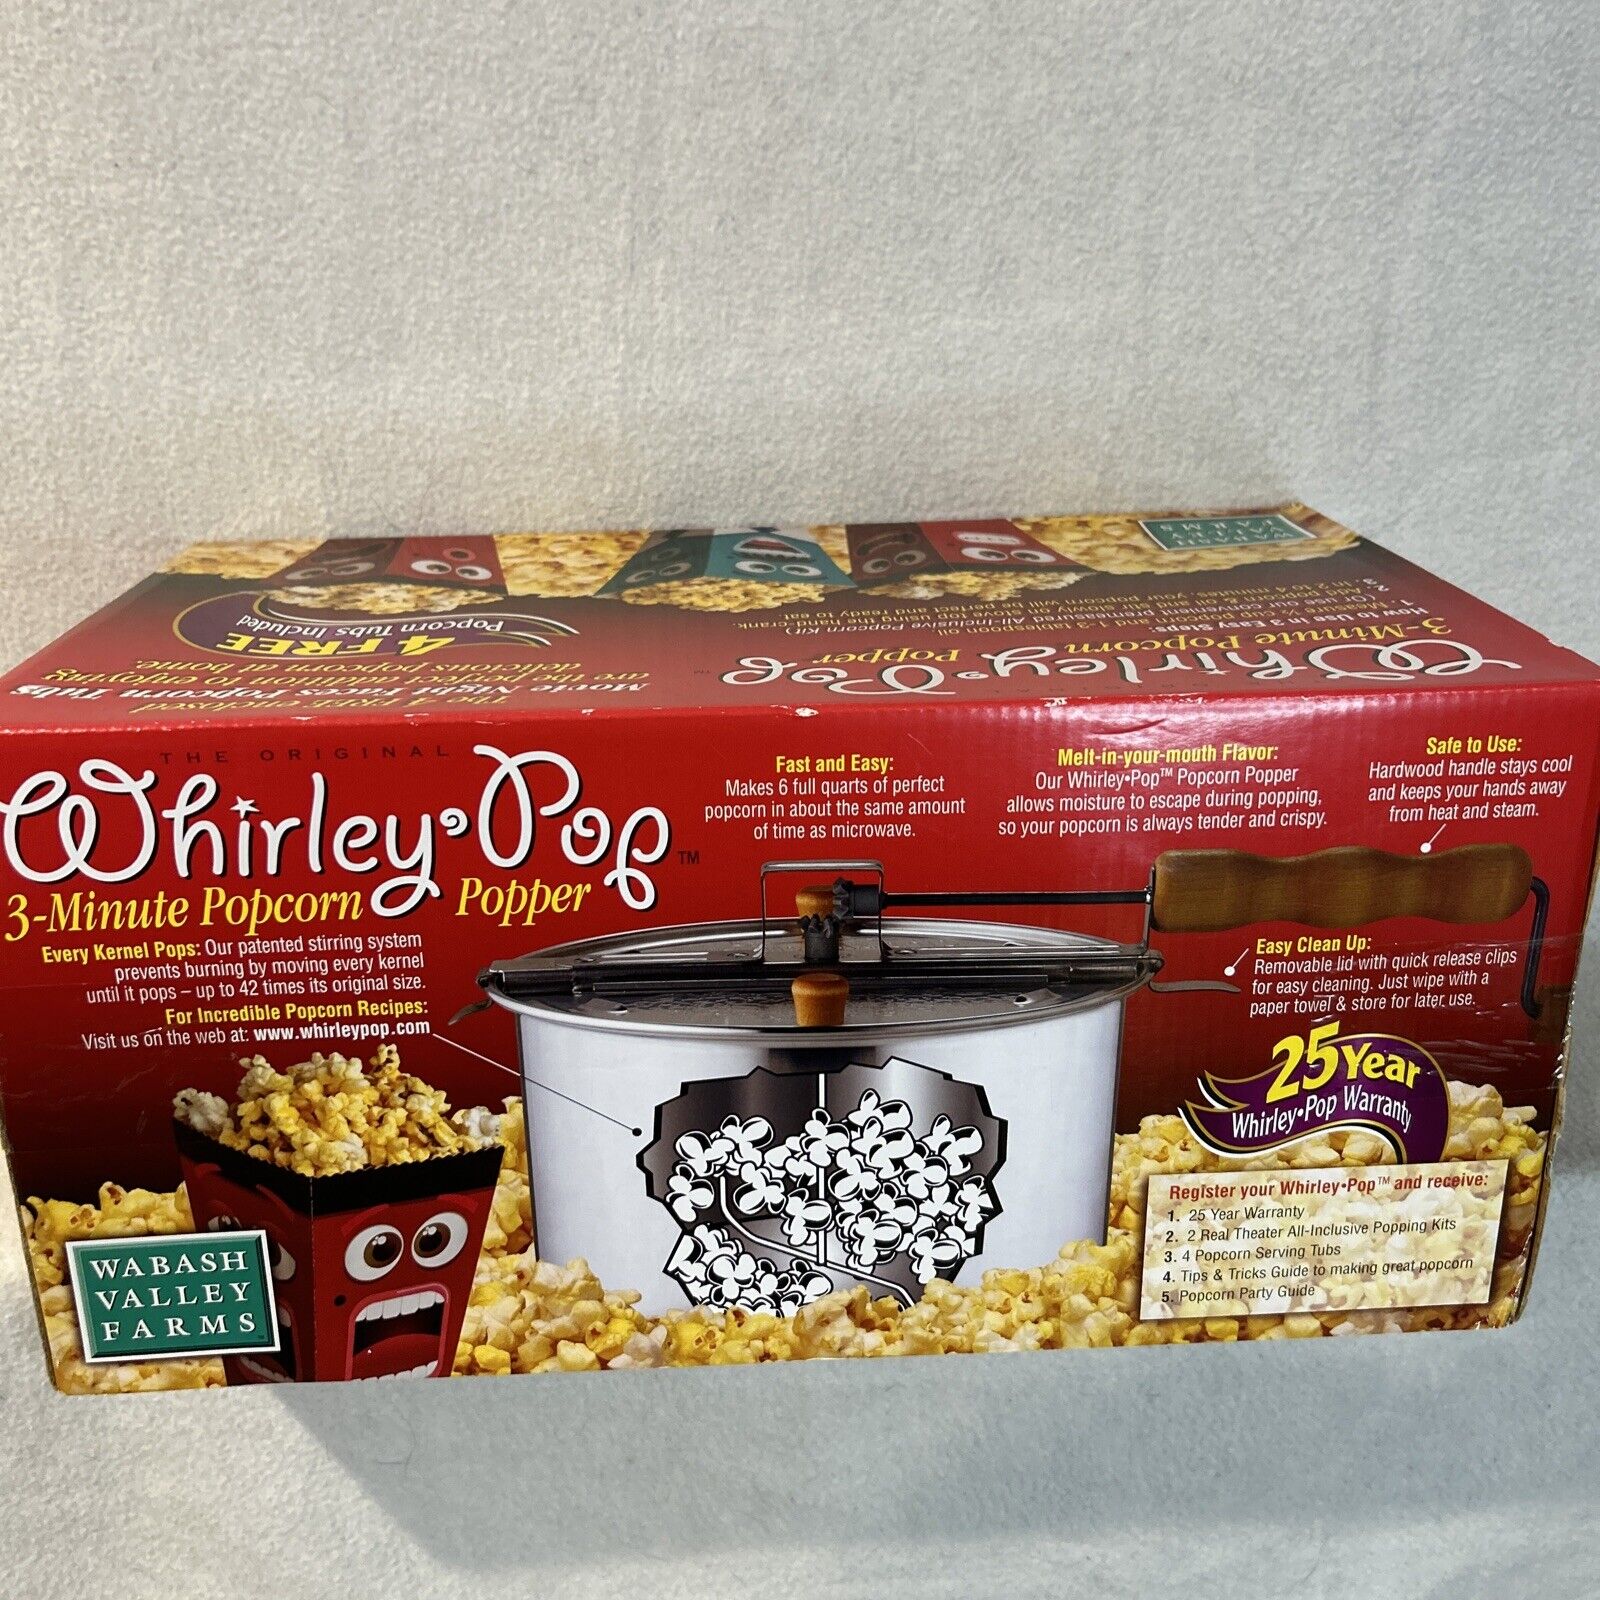 How to Clean Whirley Pop Popcorn Popper